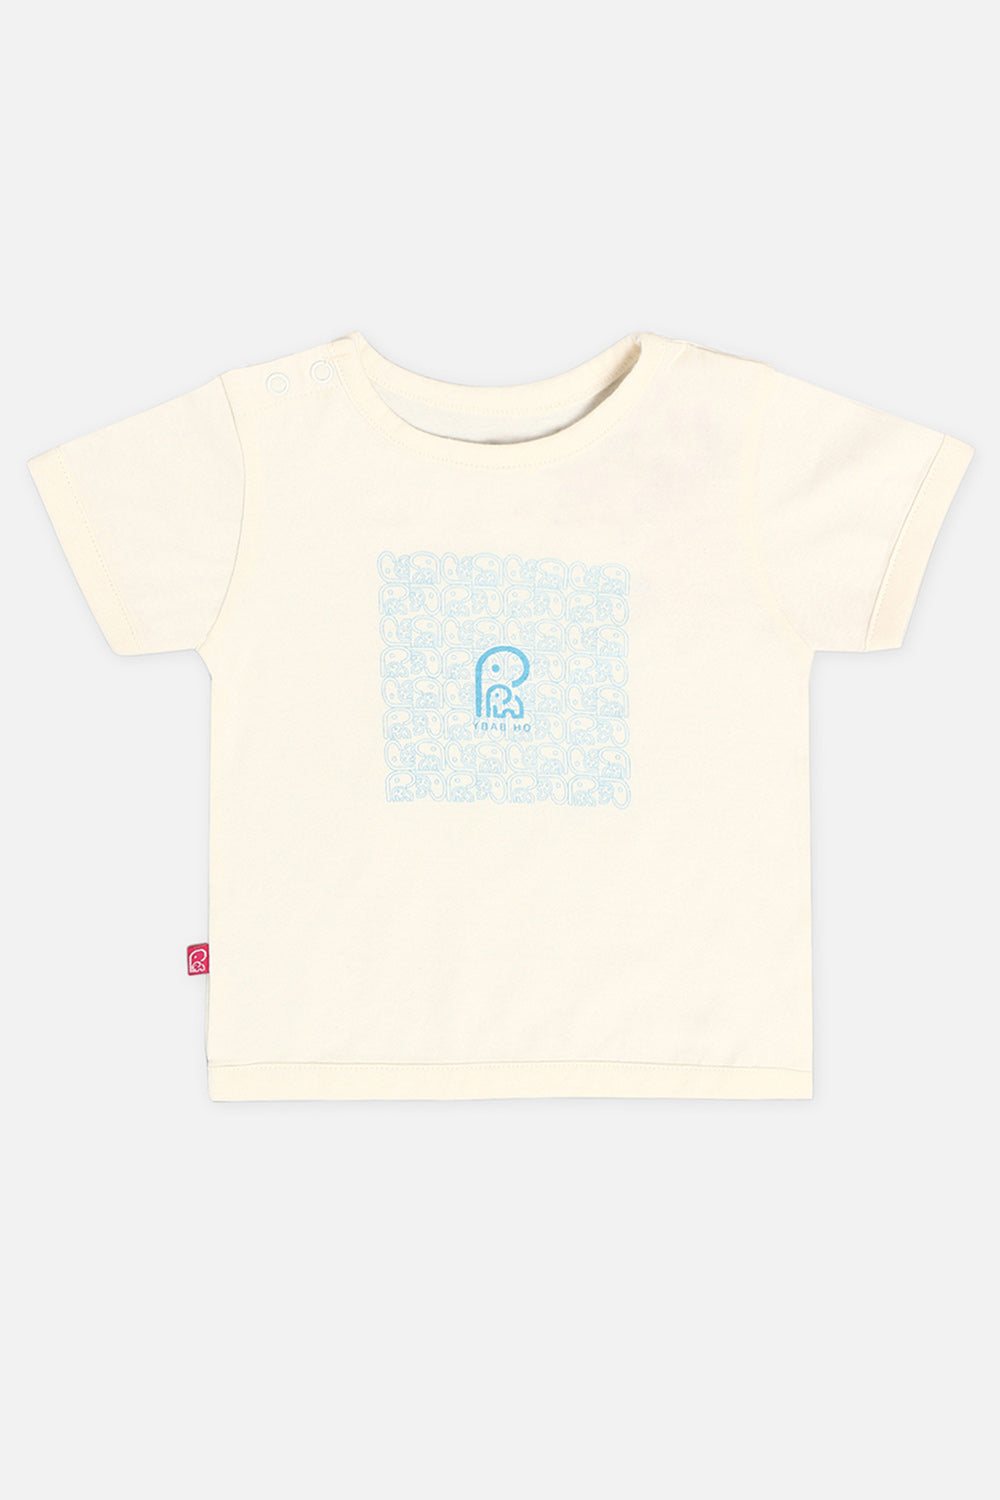 Oh Baby T Shirts Shoulder Open White-Ts17